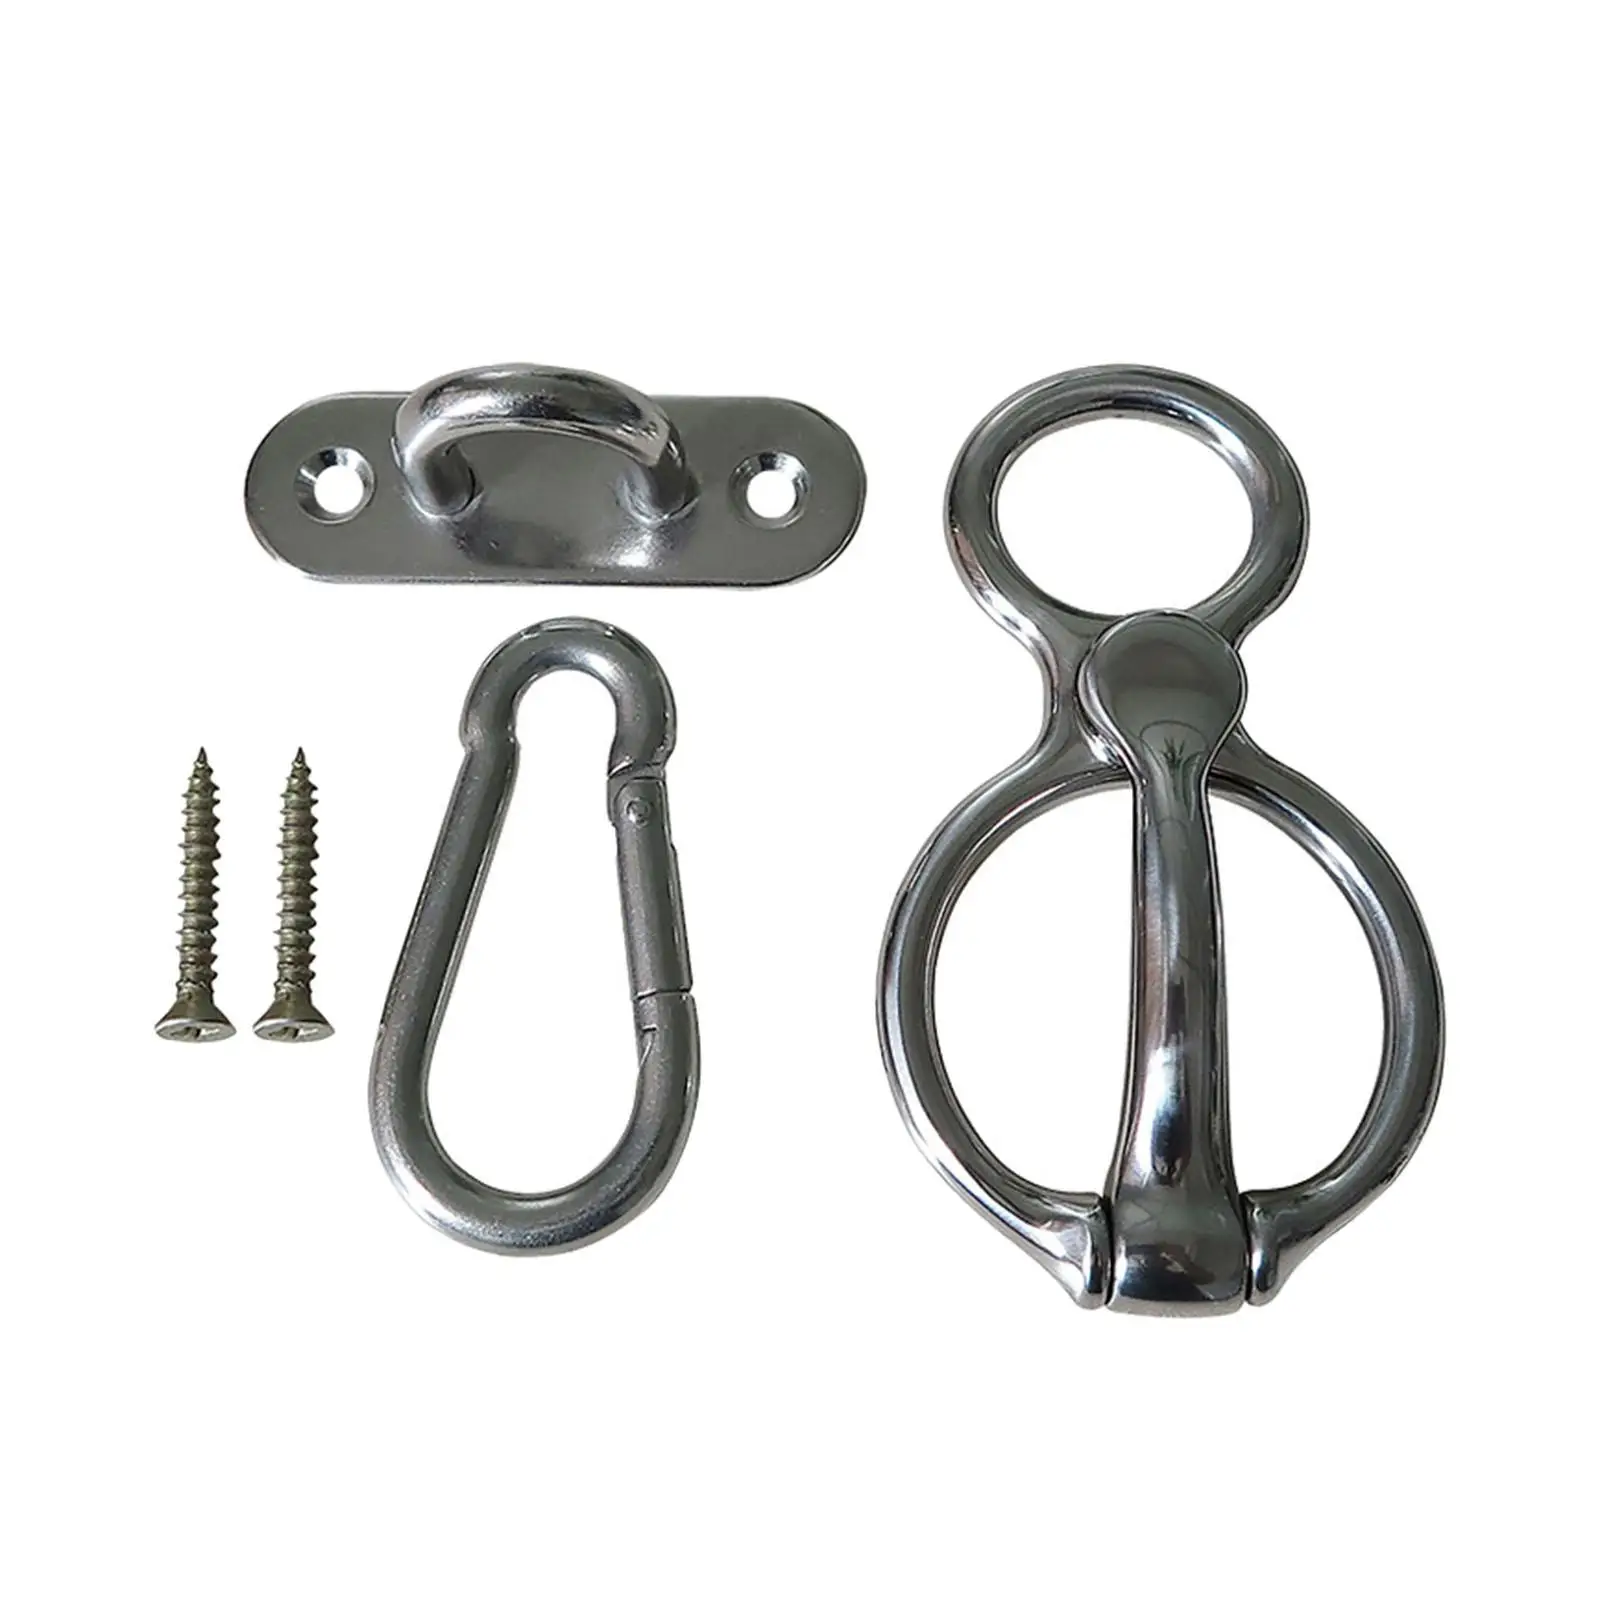 Horse Tie Ring Fasteners Outdoor Sports Equestrian Durable Hooks Stable Accessories Horse Tack Supplies Training Equipment